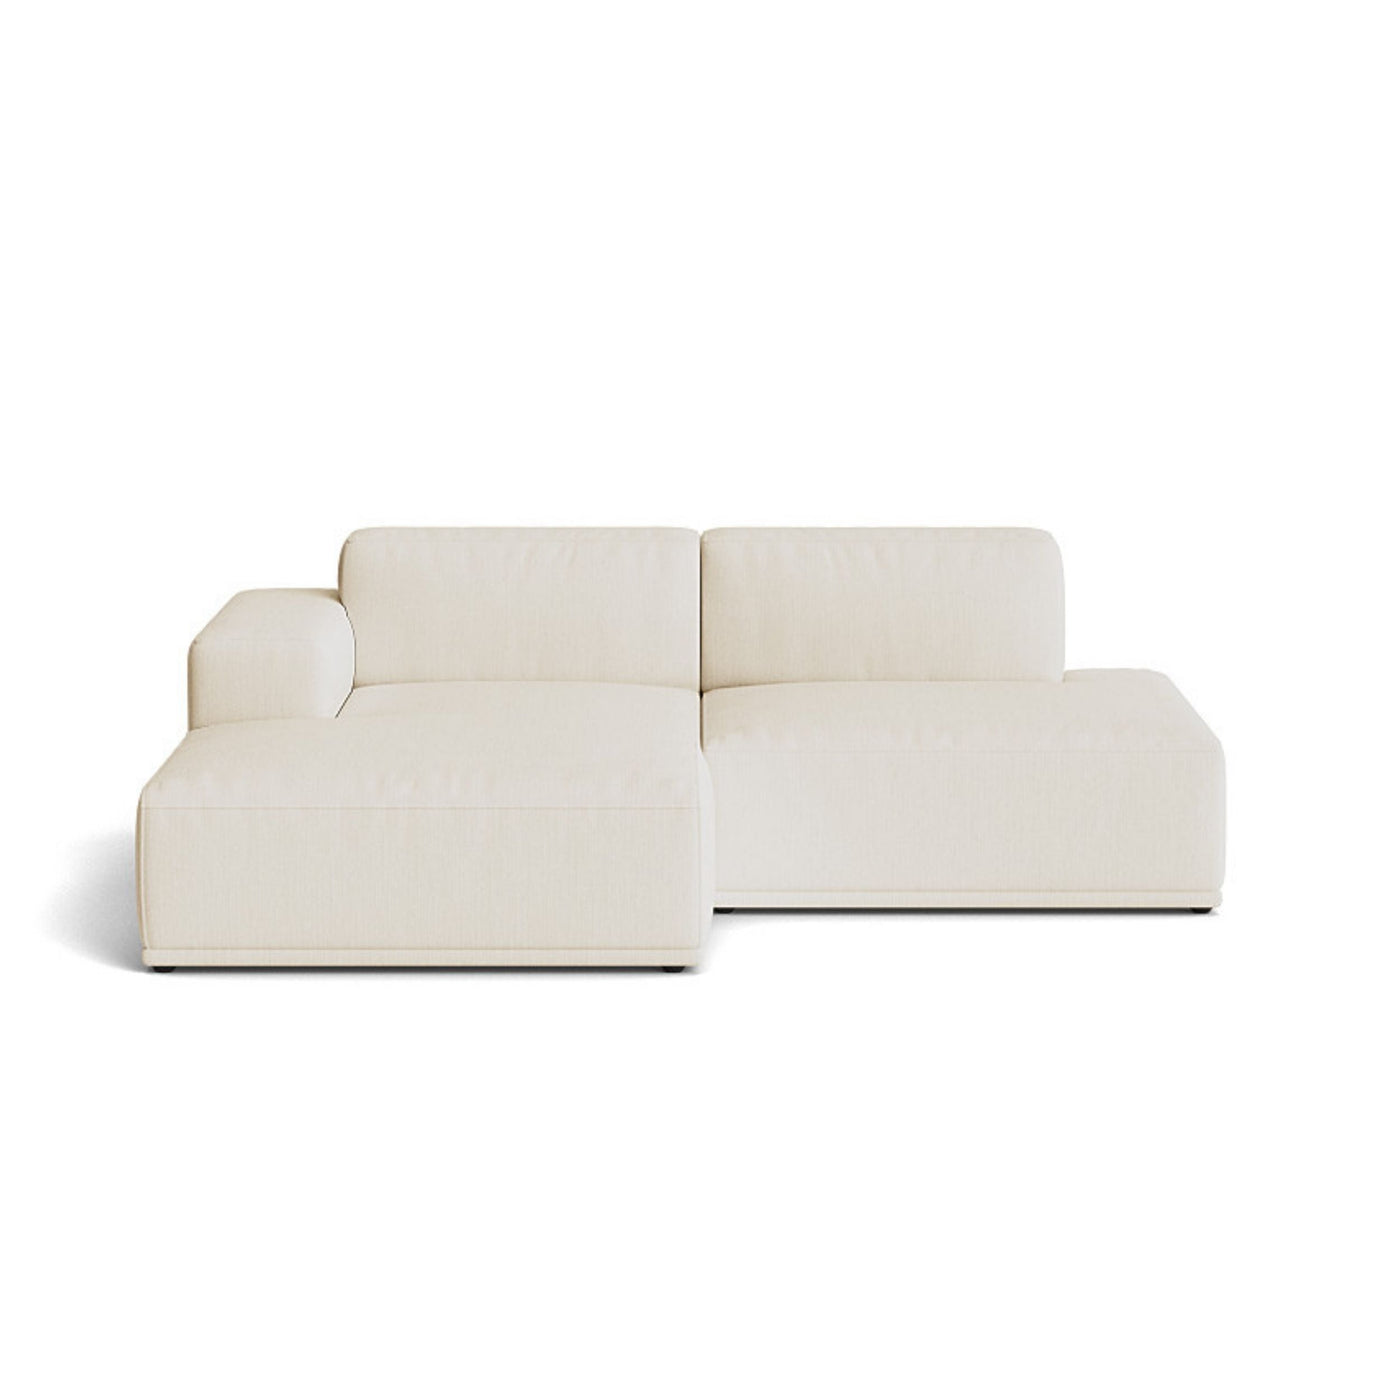 Muuto Connect Soft Modular 2 Seater Sofa, configuration 3. made-to-order from someday designs. #colour_balder-612